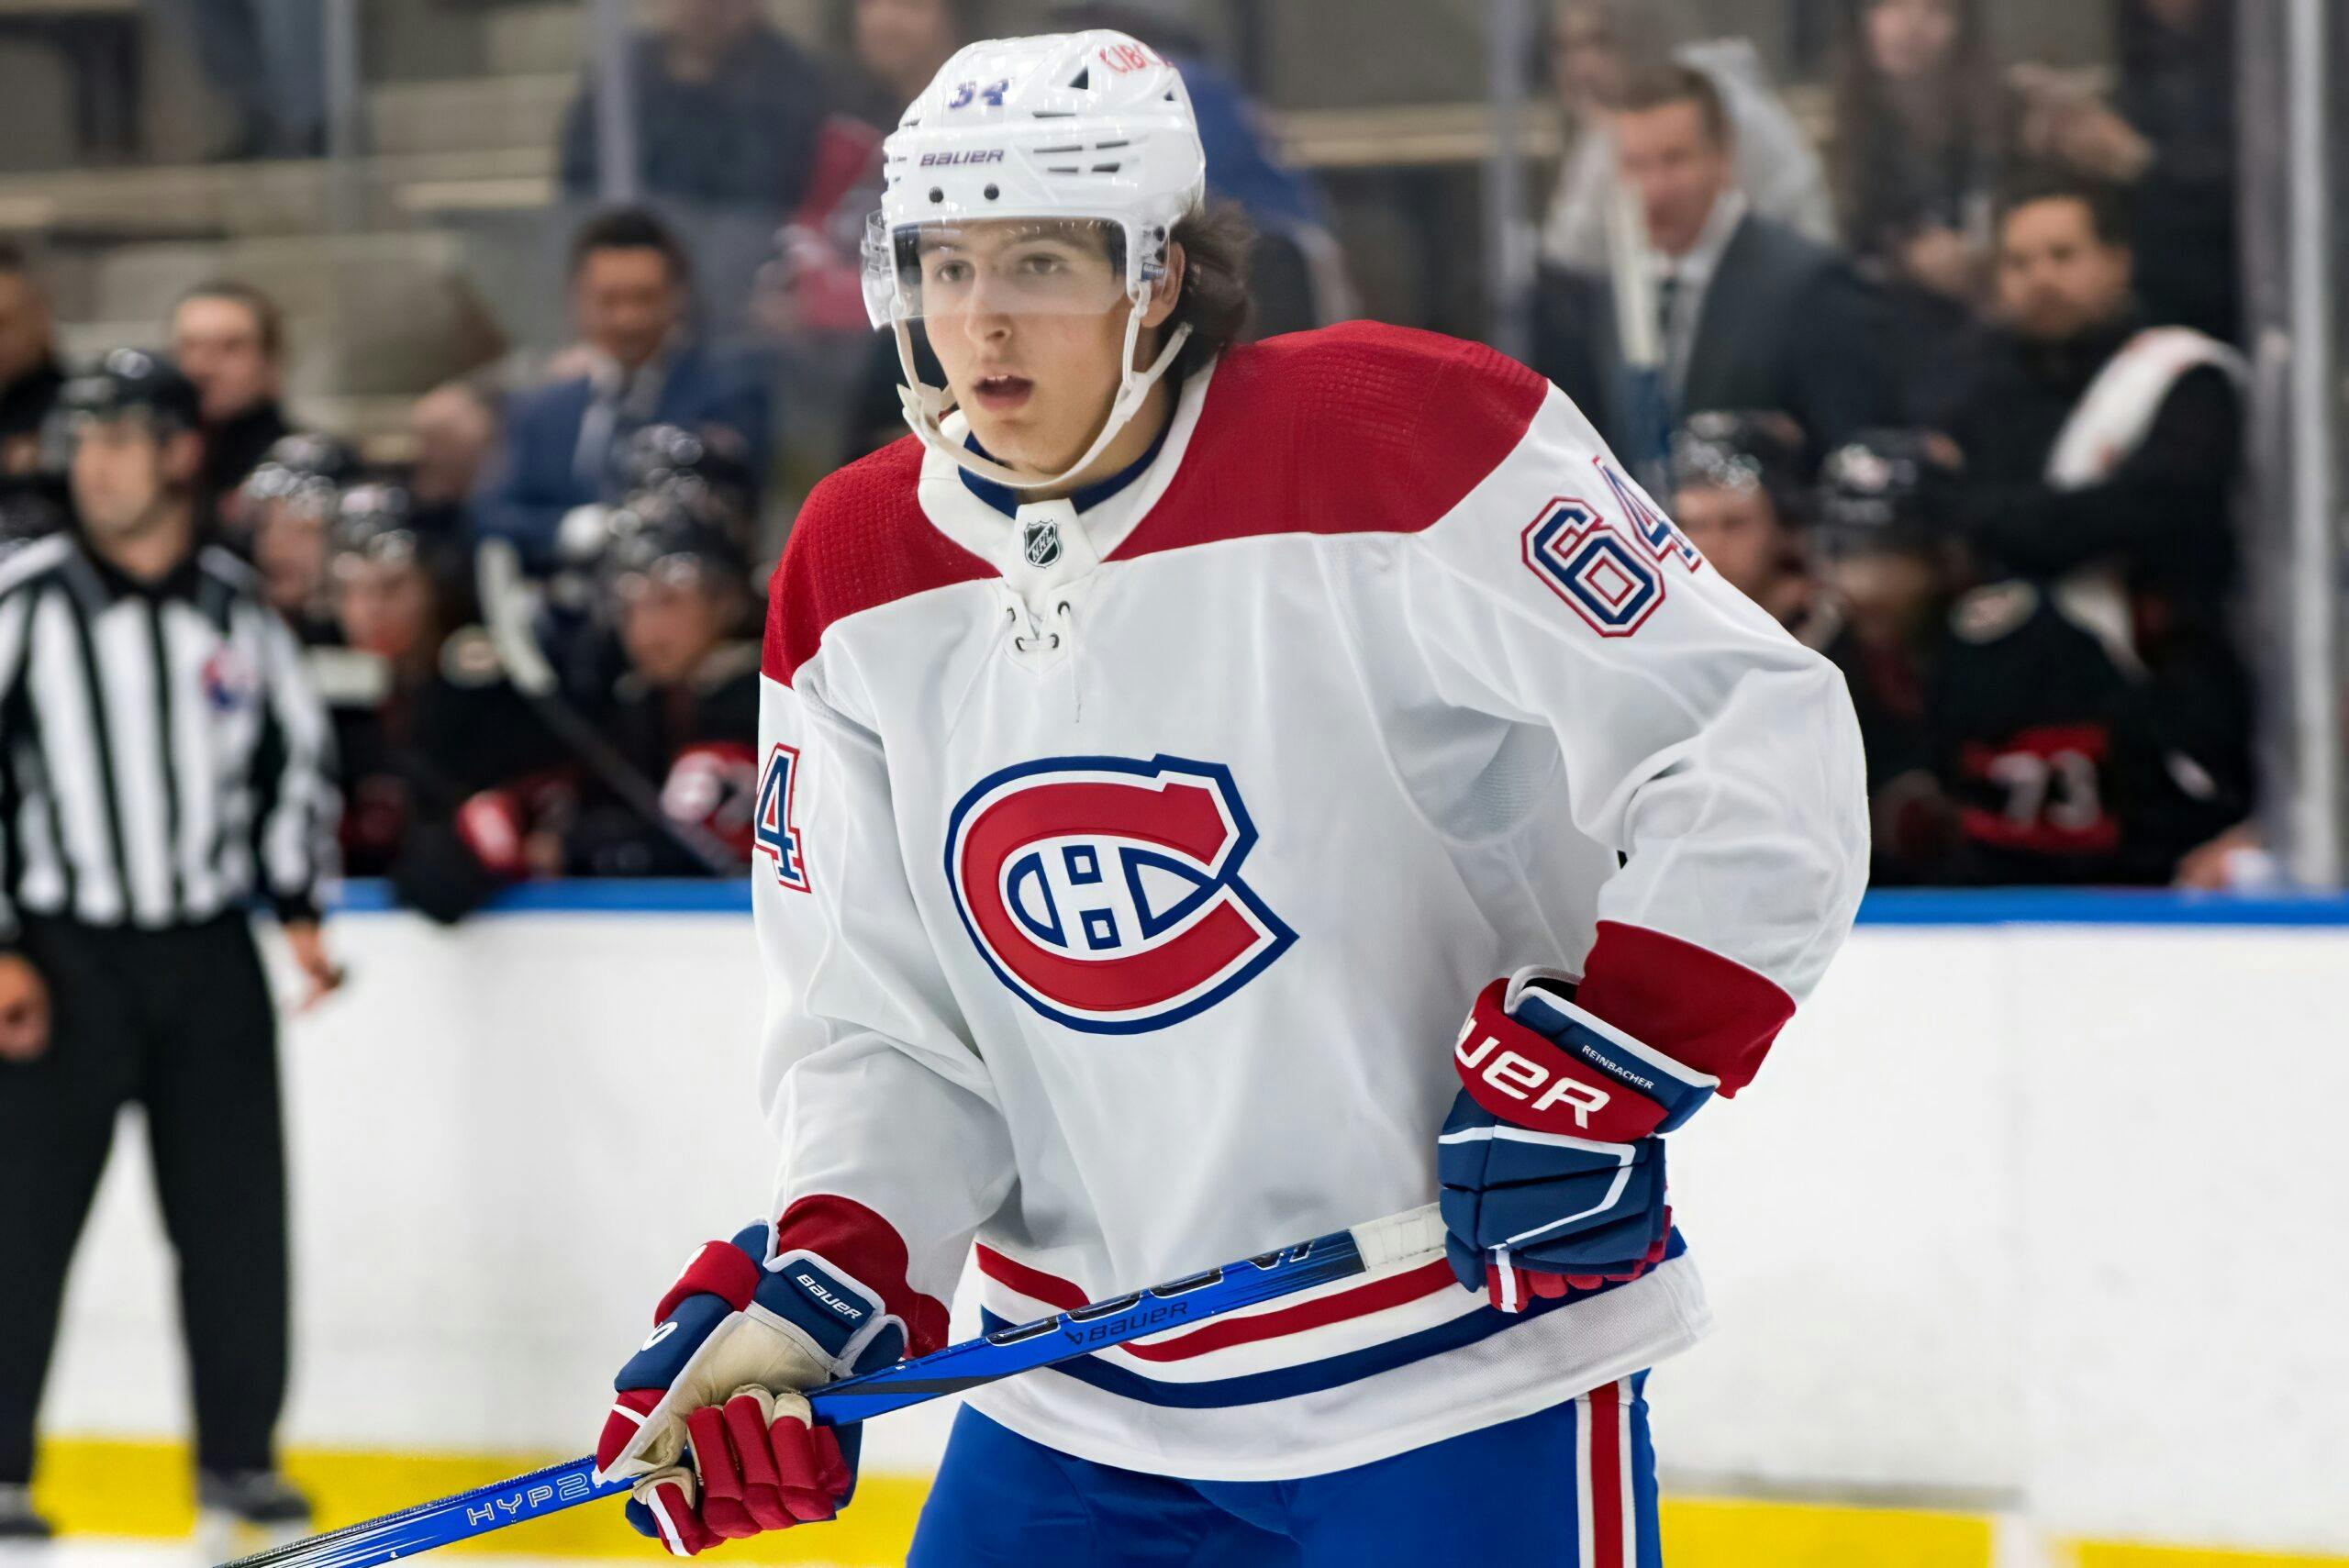 NHL Prospect Roundup: Habs fans, it’s almost David Reinbacher time